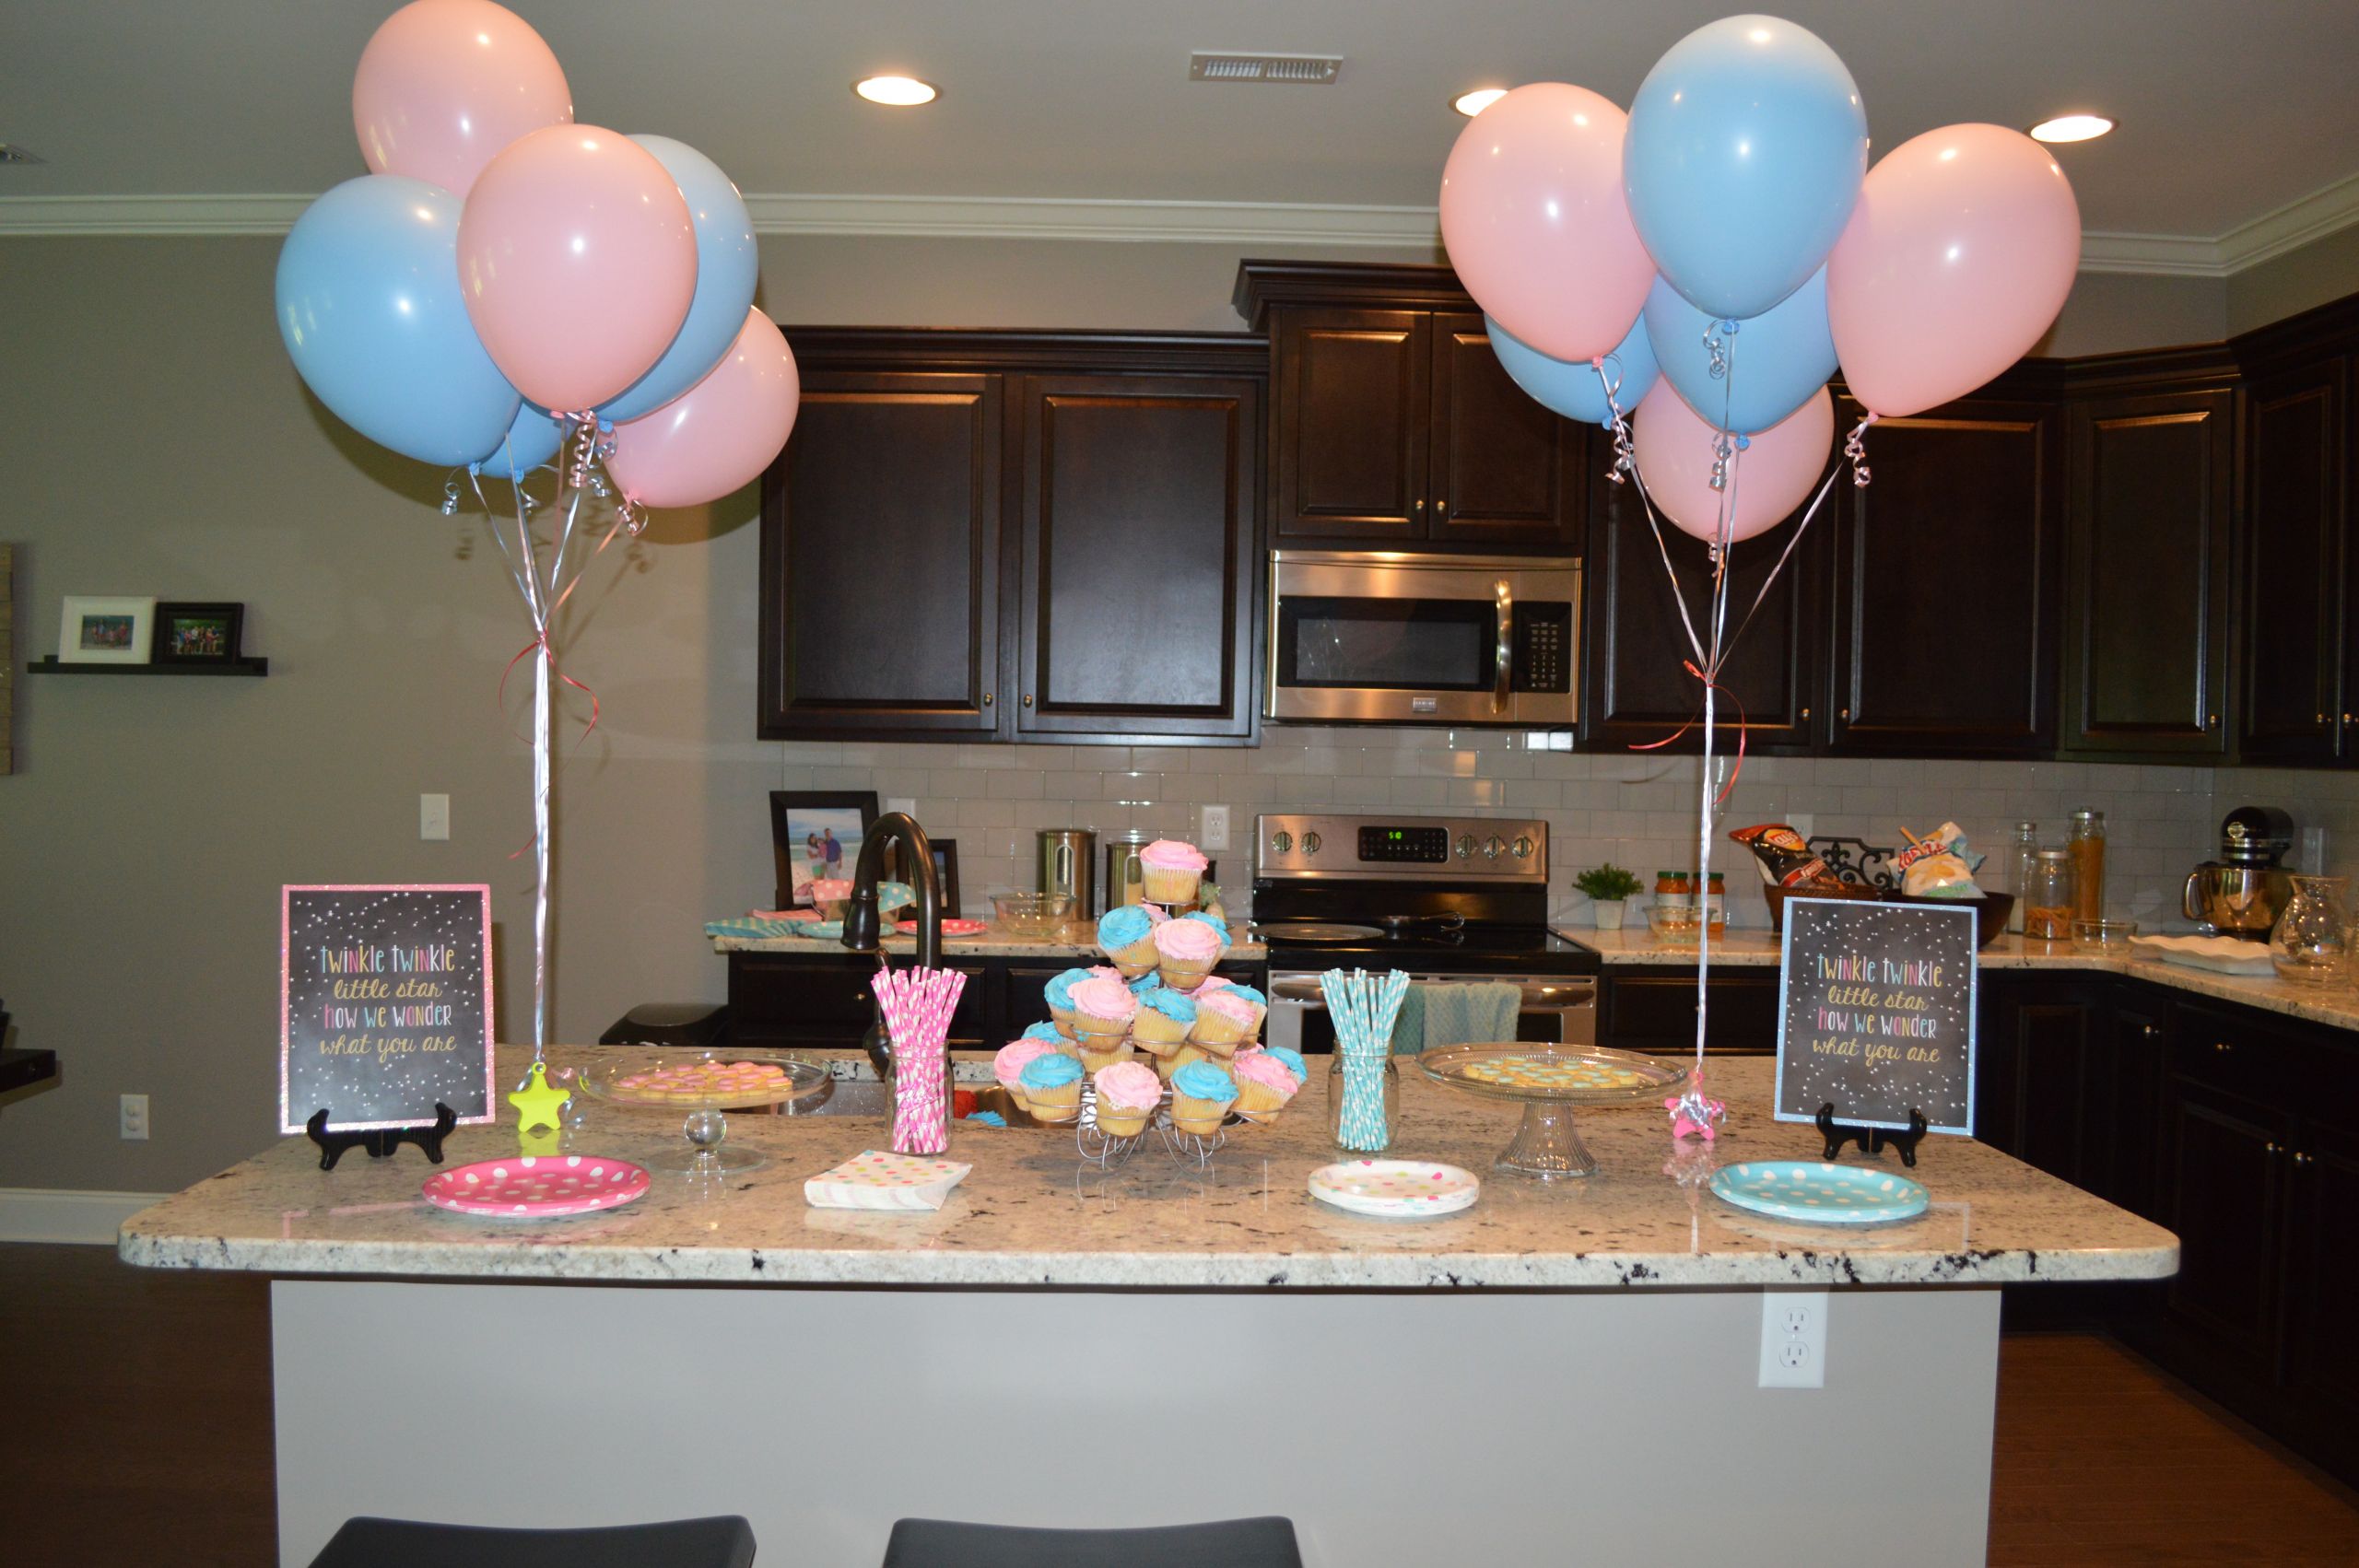 20 Of the Best Ideas for Party City Gender Reveal Ideas Home, Family